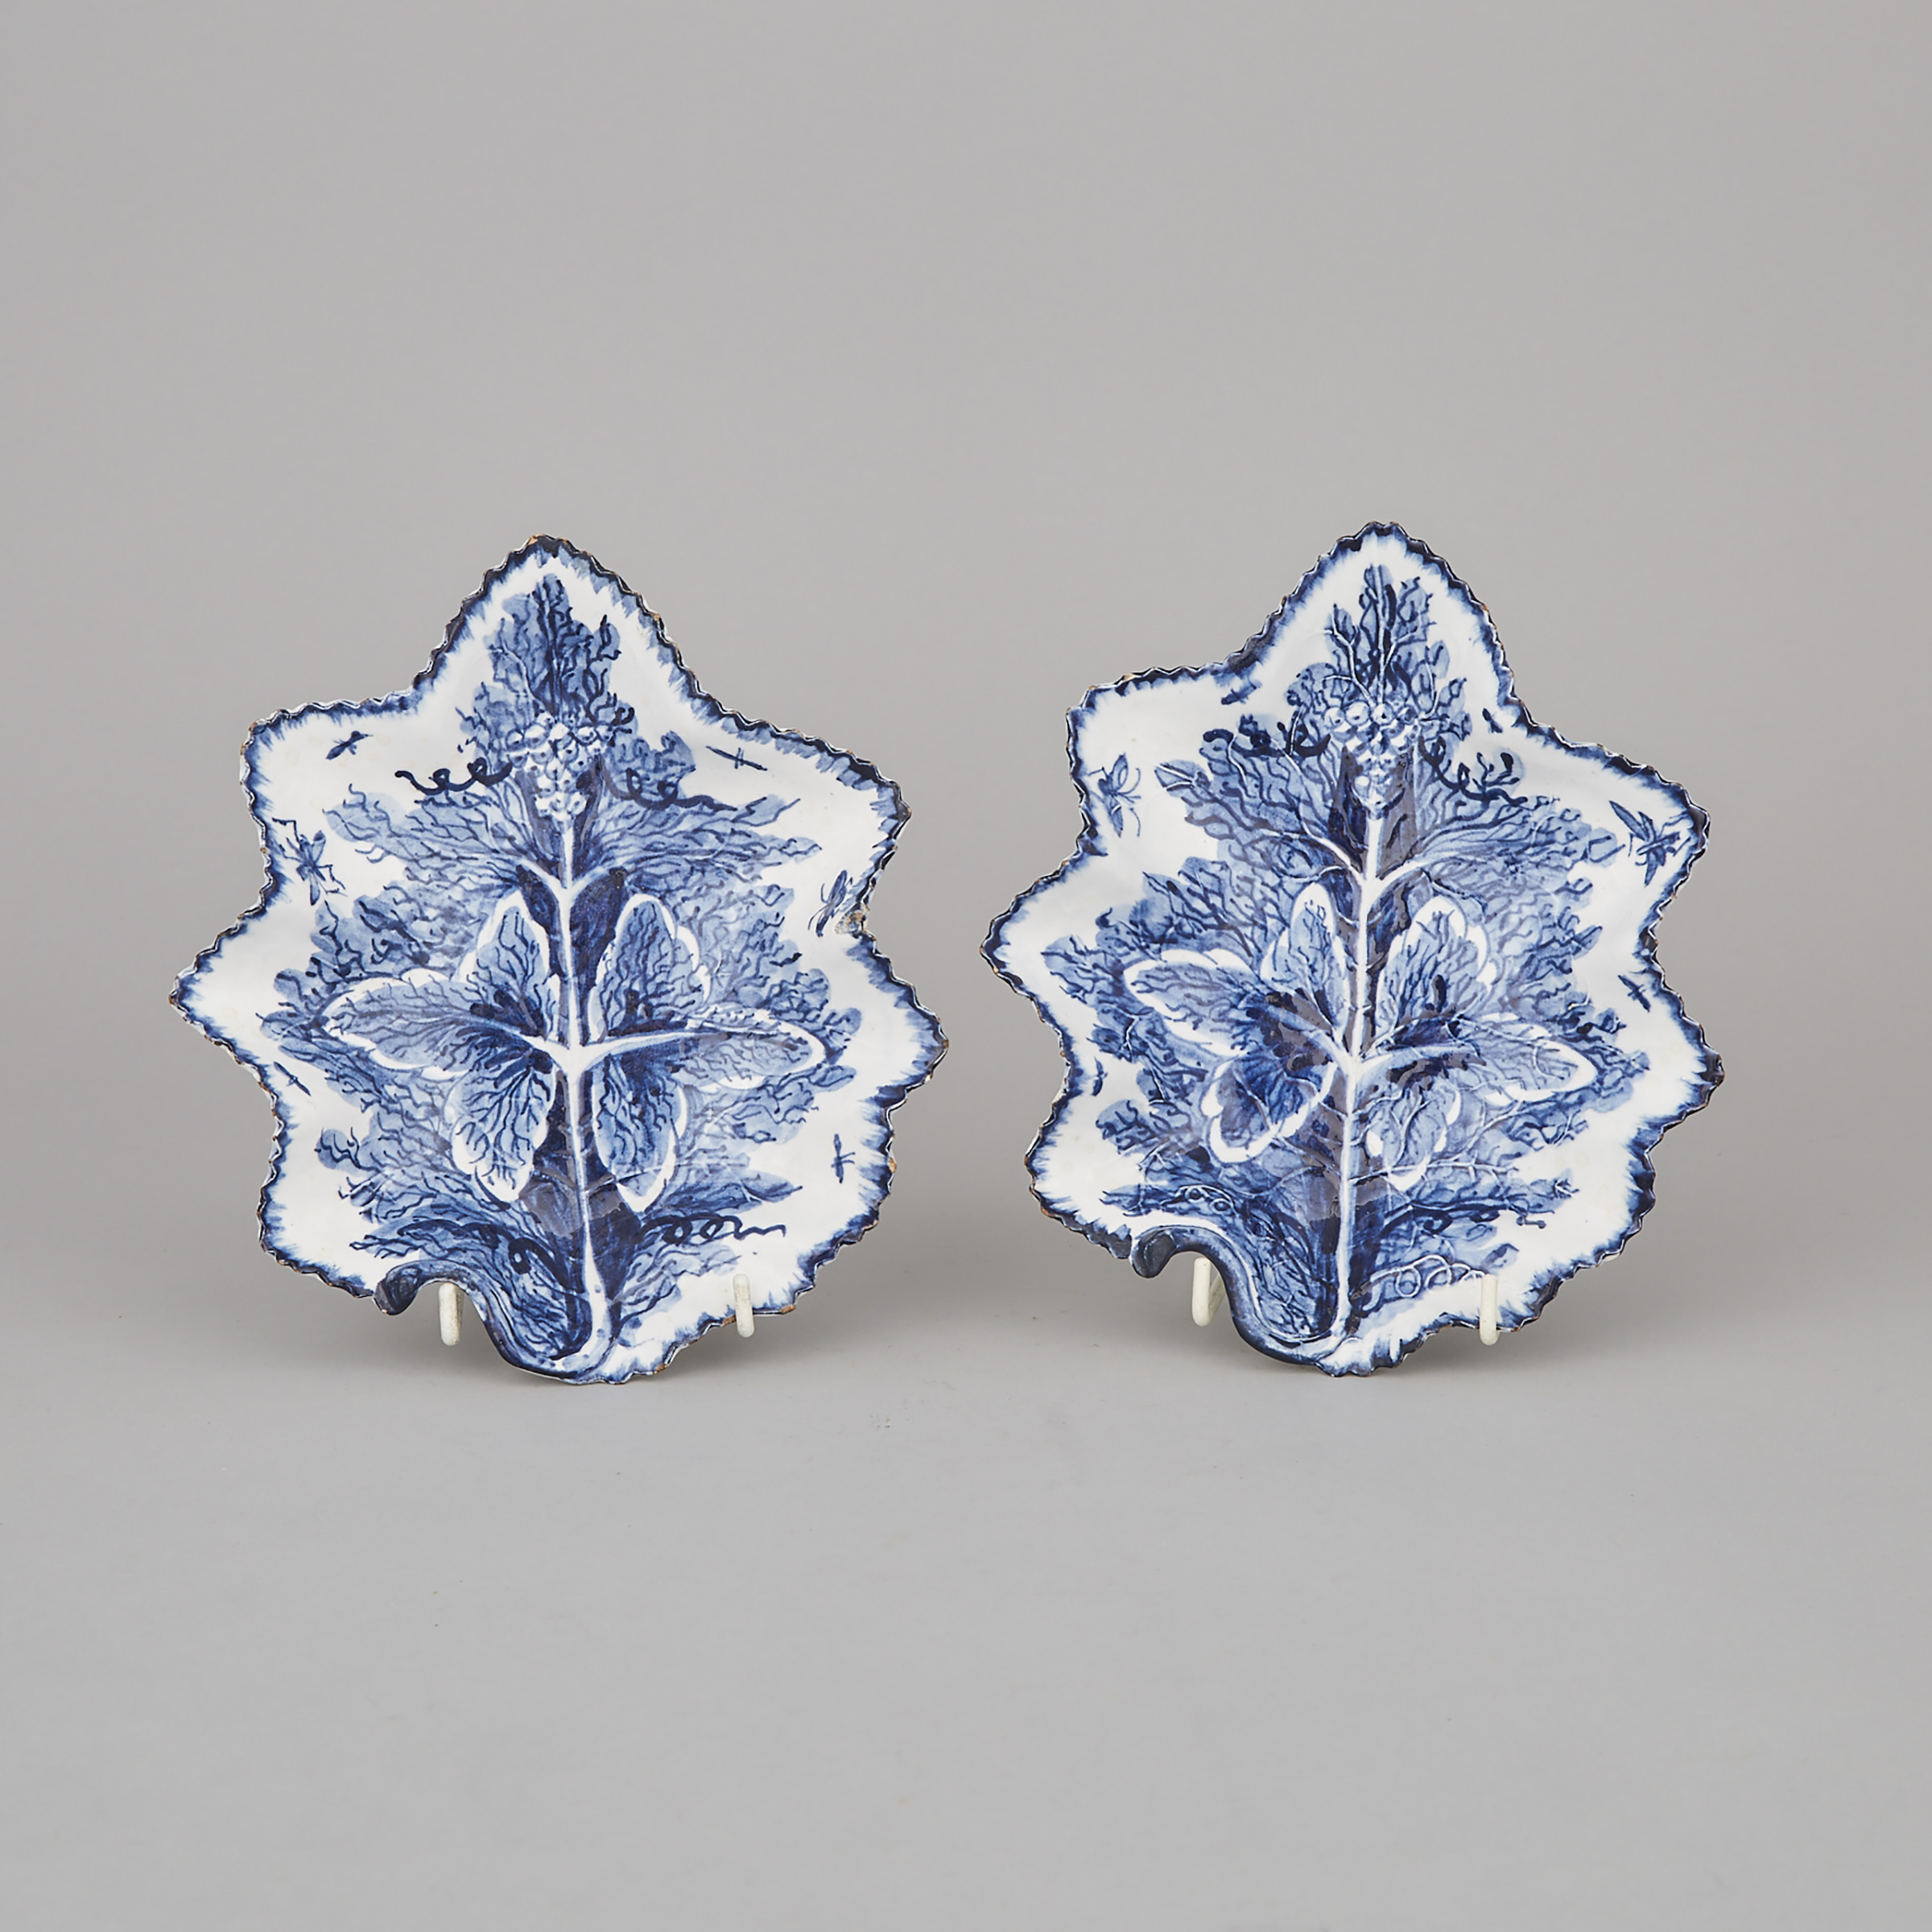 Pair of Bow Moulded Blue and White Leaf Shaped Dishes, c.1770